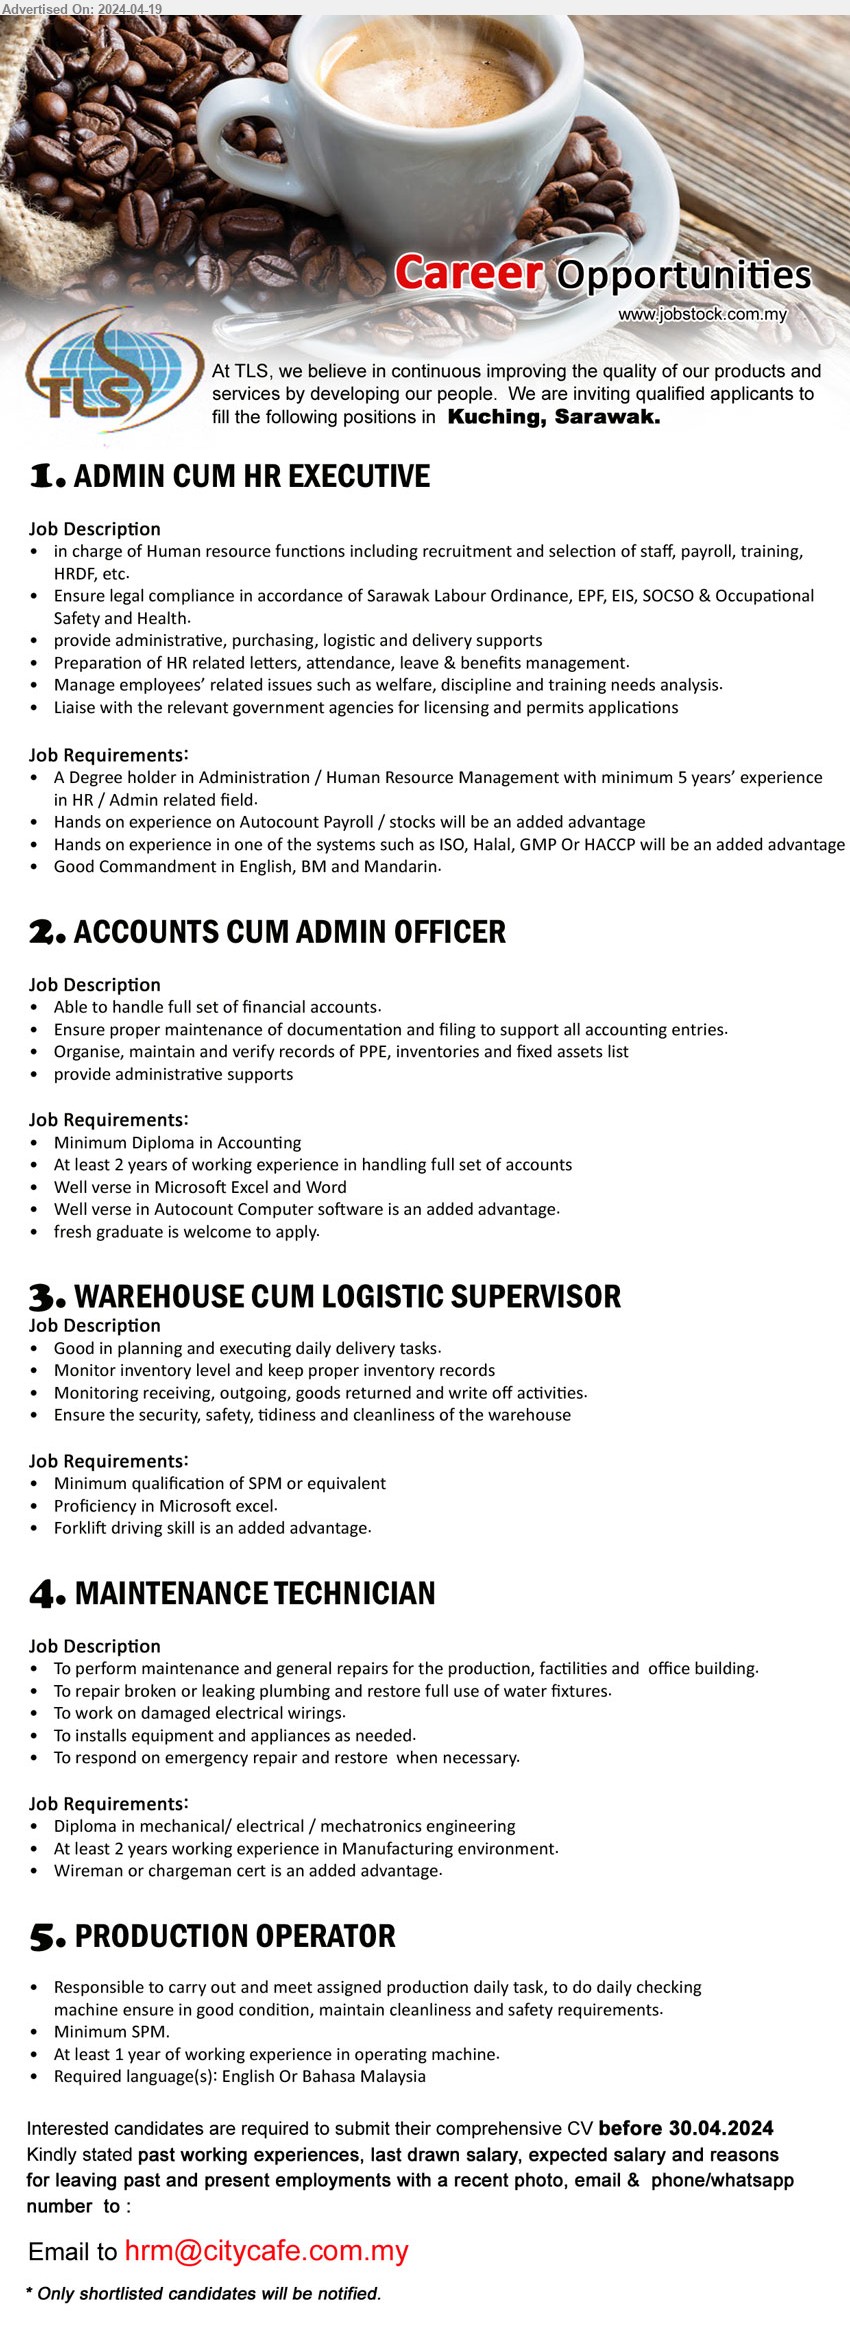 TLS - 1. ADMIN CUM HR EXECUTIVE (Kuching), A Degree holder in Administration / Human Resource Management with minimum 5 years’ experience in HR / Admin,...
2. ACCOUNTS CUM ADMIN OFFICER (Kuching), Diploma in Accounting, At least 2 years of working experience in handling full set of accounts,...
3. WAREHOUSE CUM LOGISTIC SUPERVISOR (Kuching), SPM or equivalent, Proficiency in Microsoft excel.,...
4. MAINTENANCE TECHNICIAN  (Kuching), Diploma in Mechanical/ Electrical / Mechatronics Engineering, At least 2 years working experience in Manufacturing environment.,...
5. PRODUCTION OPERATOR (Kuching), SPM, At least 1 year of working experience in operating machine.,...
Email resume to ...
